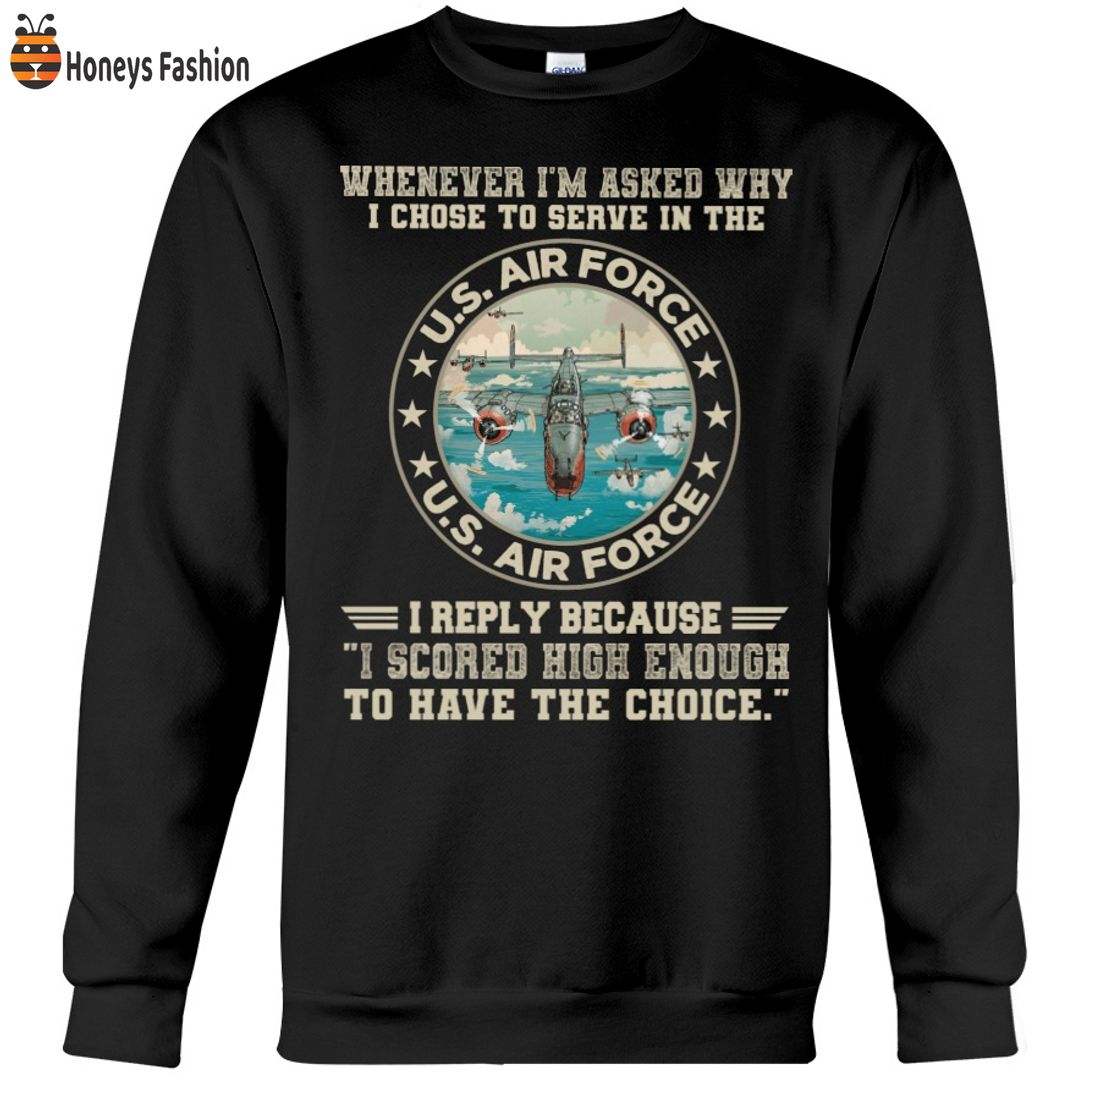 BEST SELLER I Chose To Serve In The US Air Force 2D Hoodie Tshirt